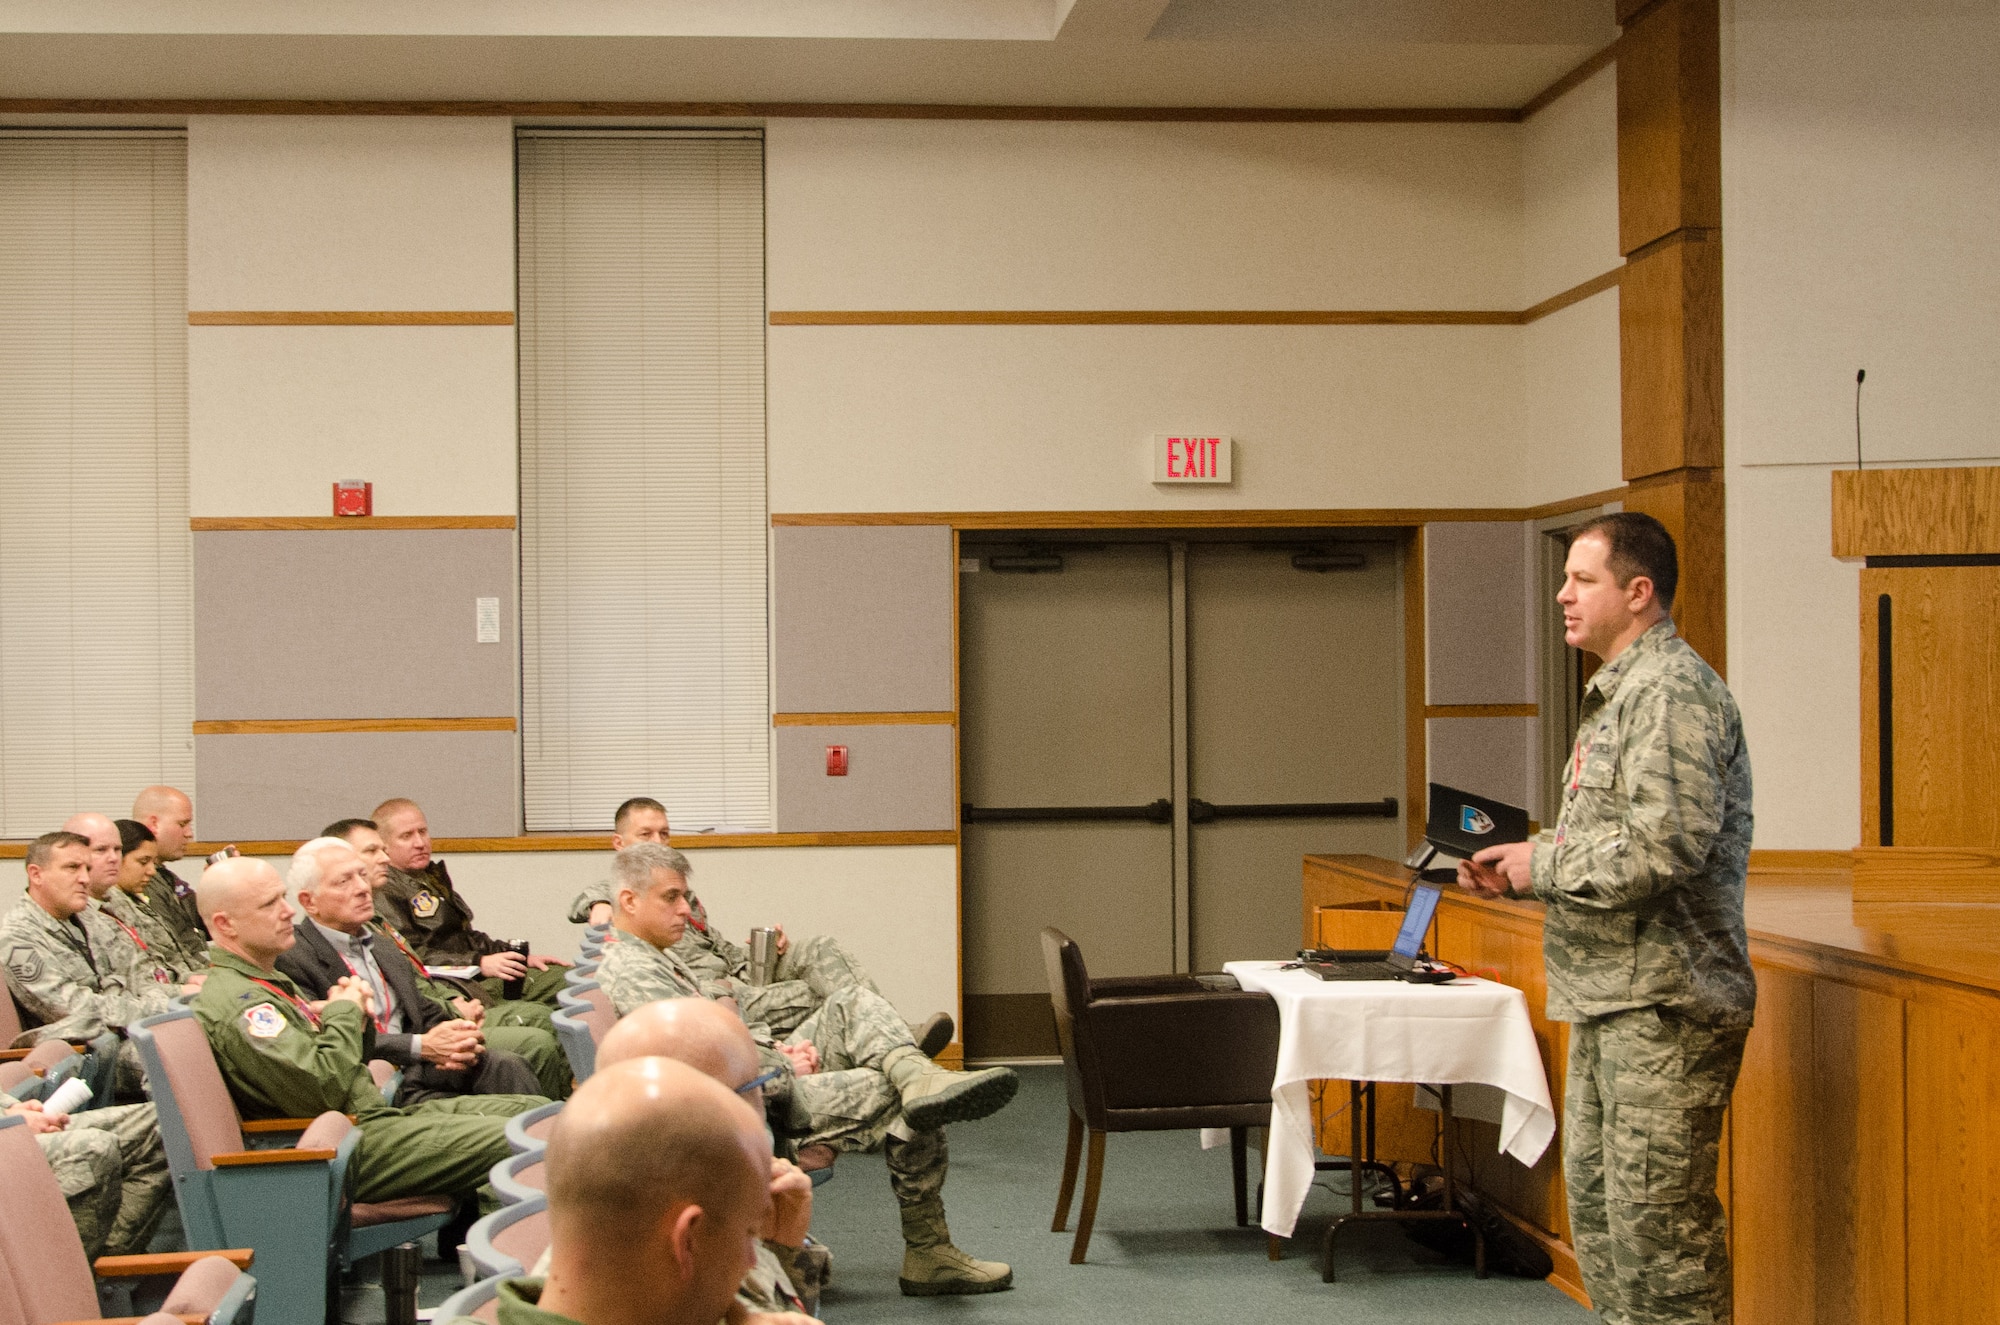 U.S. Air Force Col. Timothy Murphy, commander of the Advanced Airlift Tactics Training Center, speaks during the center’s 35th annual Tactics and Intelligence Symposium at Rosecrans Air National Guard Base, St. Joseph, Mo., Jan. 24, 2017. The symposium brings together mobility and tactics professionals from across the U.S. Air Force, other branches of service, and allied nations. (U.S. Air National Guard photo by Master Sgt. Erin Hickok)